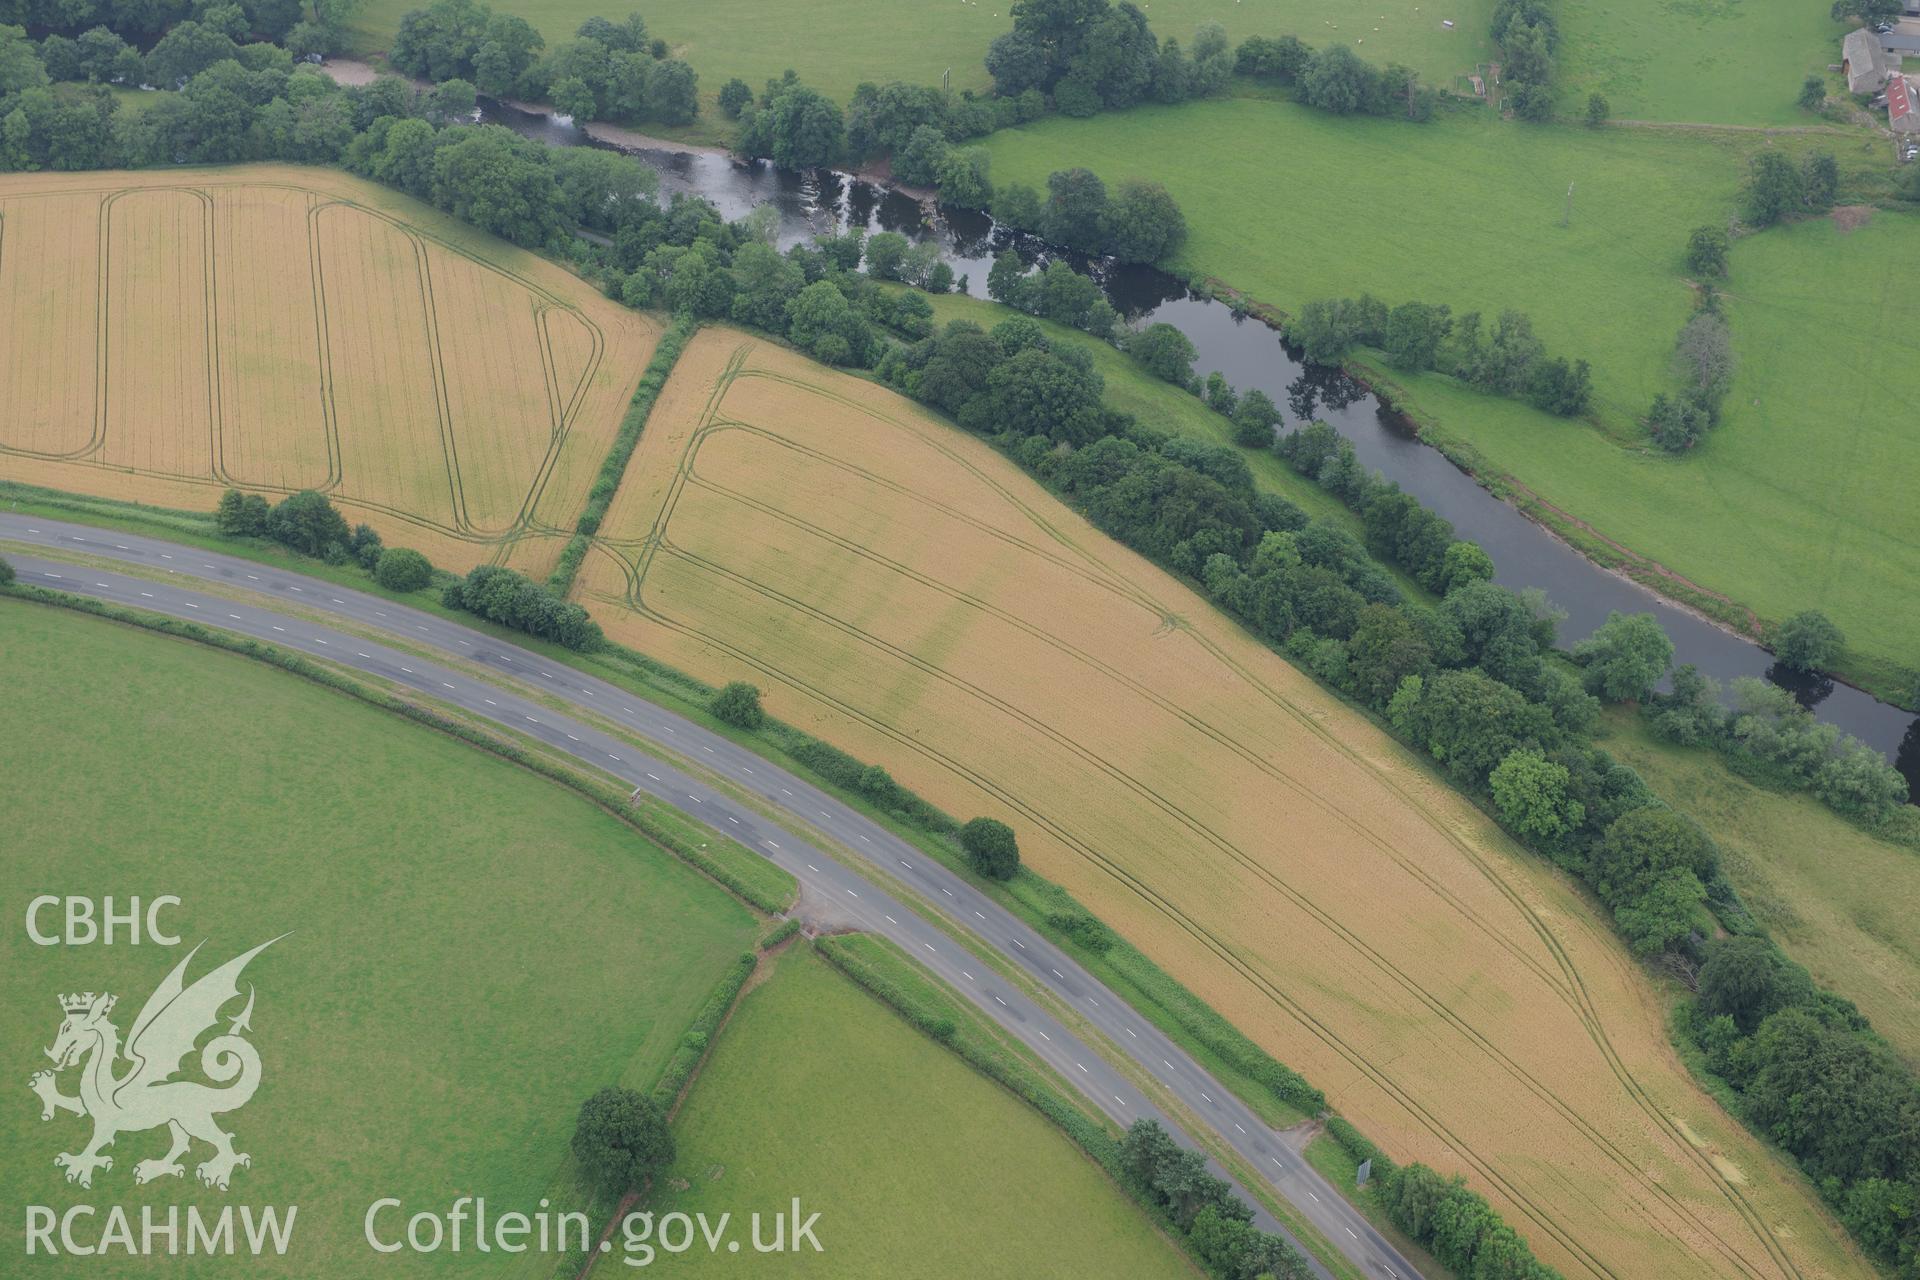 Cefn-brynich Roman fort, general view of cropmarks from north showing marching camp to west of fort, taken by RCAHMW 1st August 2013.